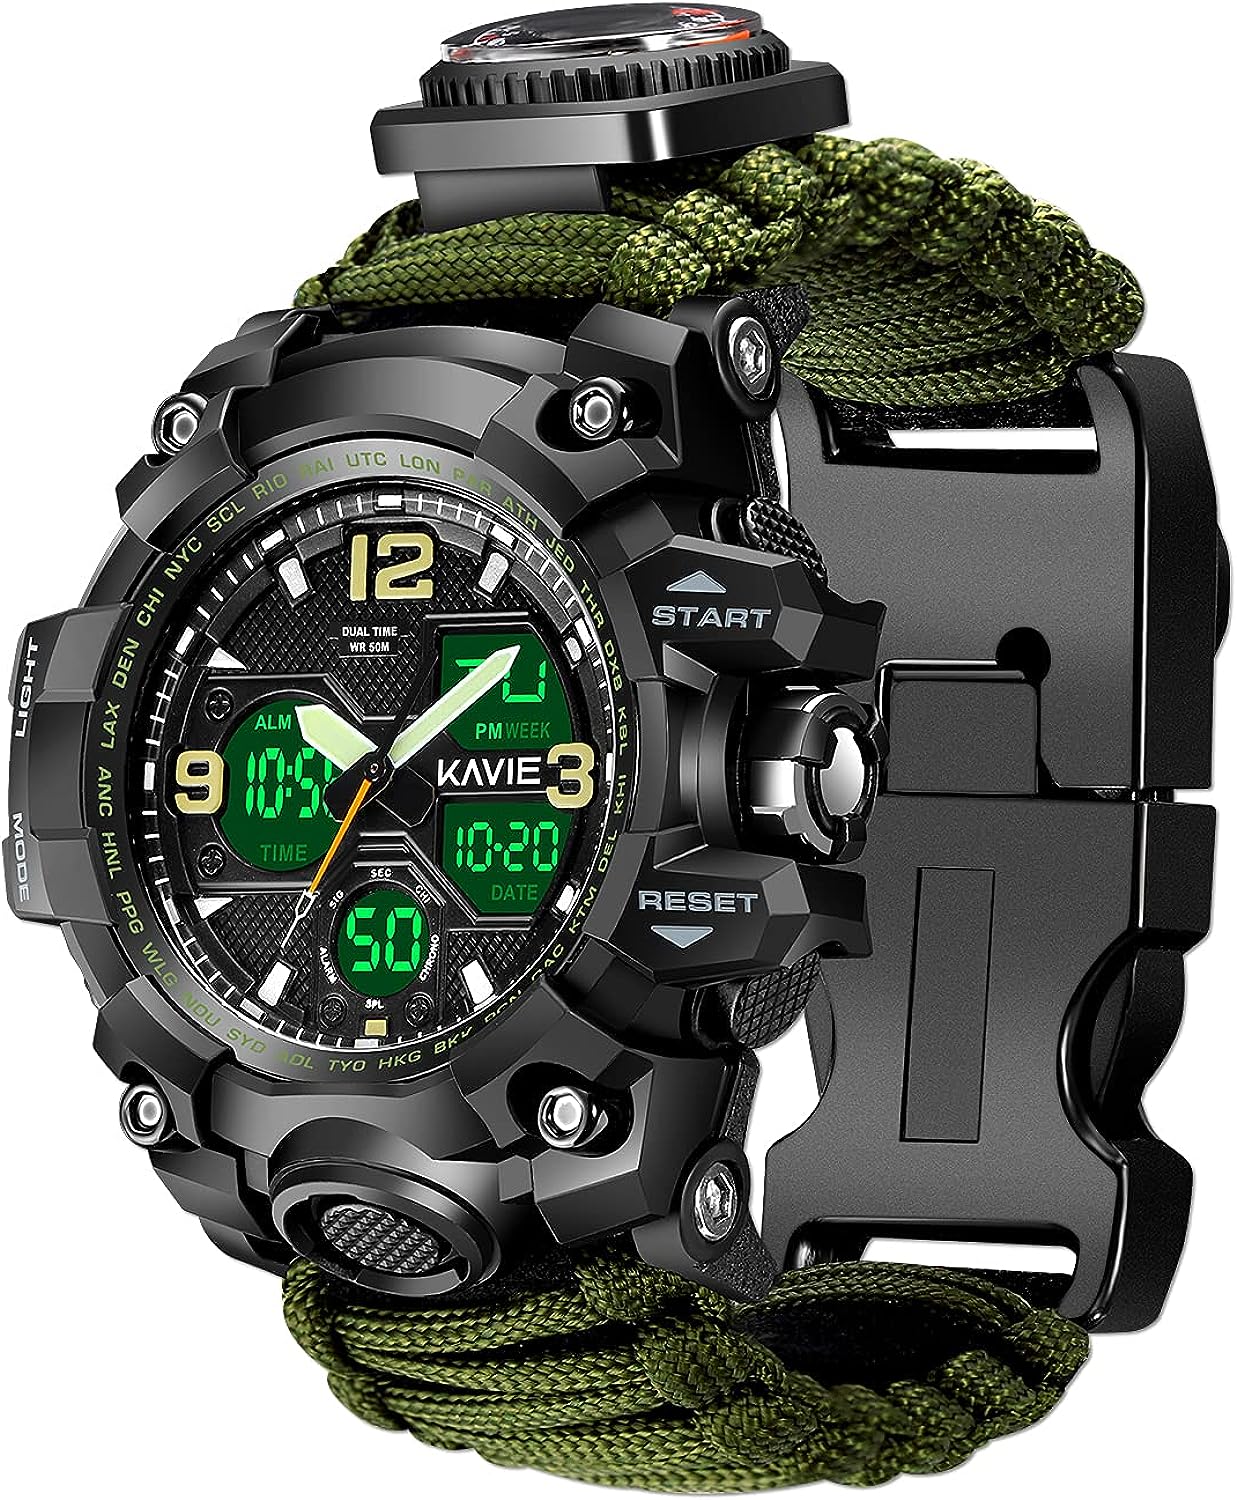 23-in-1 Survival Military Digital Watch, Mens Tactical Multi-Functional and Adjustable Wristband Outdoors Waterproof Sports Dual Dial Watches with Compass Paracord Band